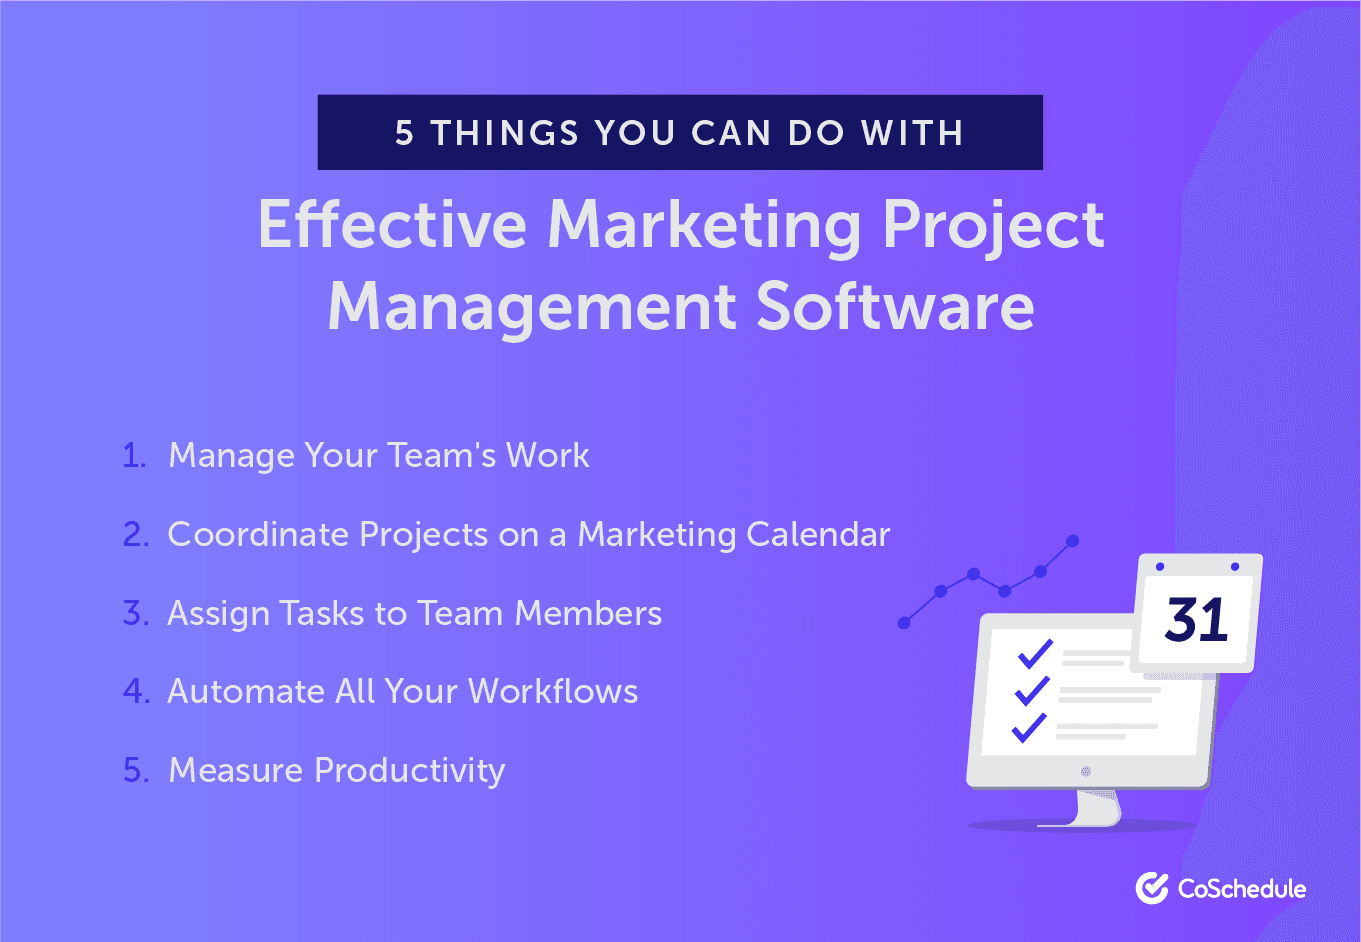 5 Things You Can Do With Effective Marketing Project Management Software